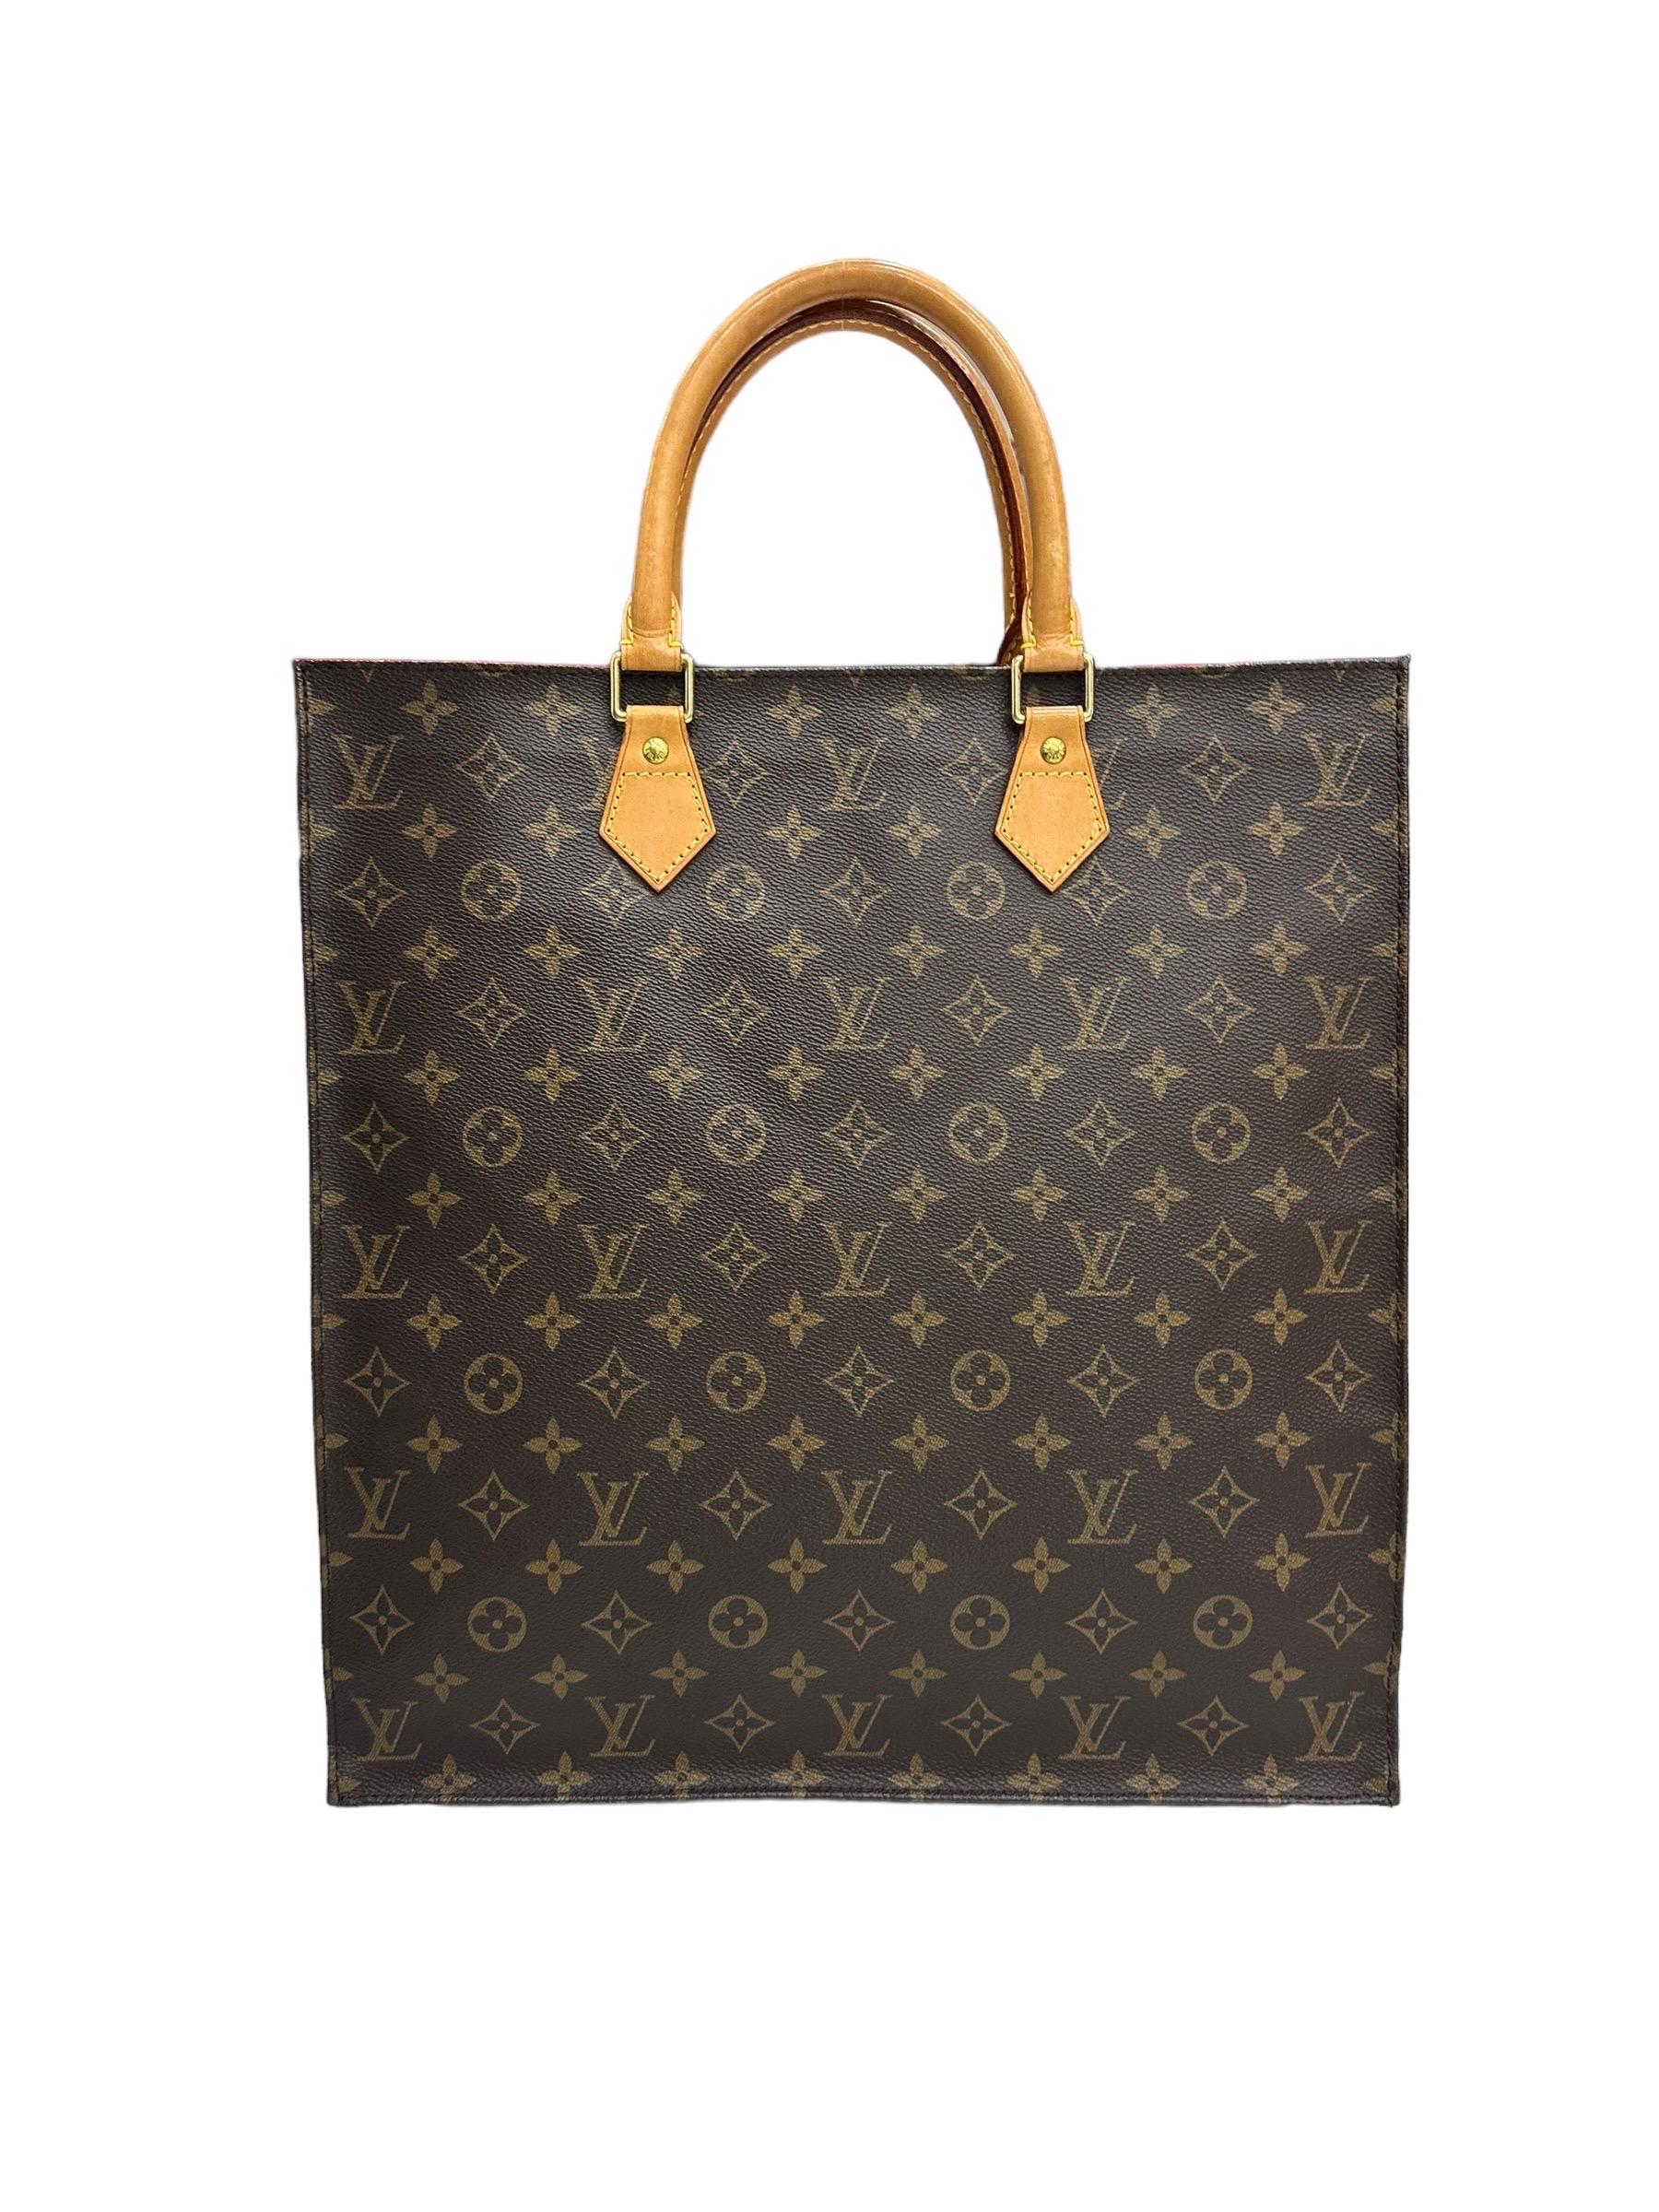 Borsa A Mano Louis Vuitton Sac Plat GM Monogram In Good Condition For Sale In Torre Del Greco, IT